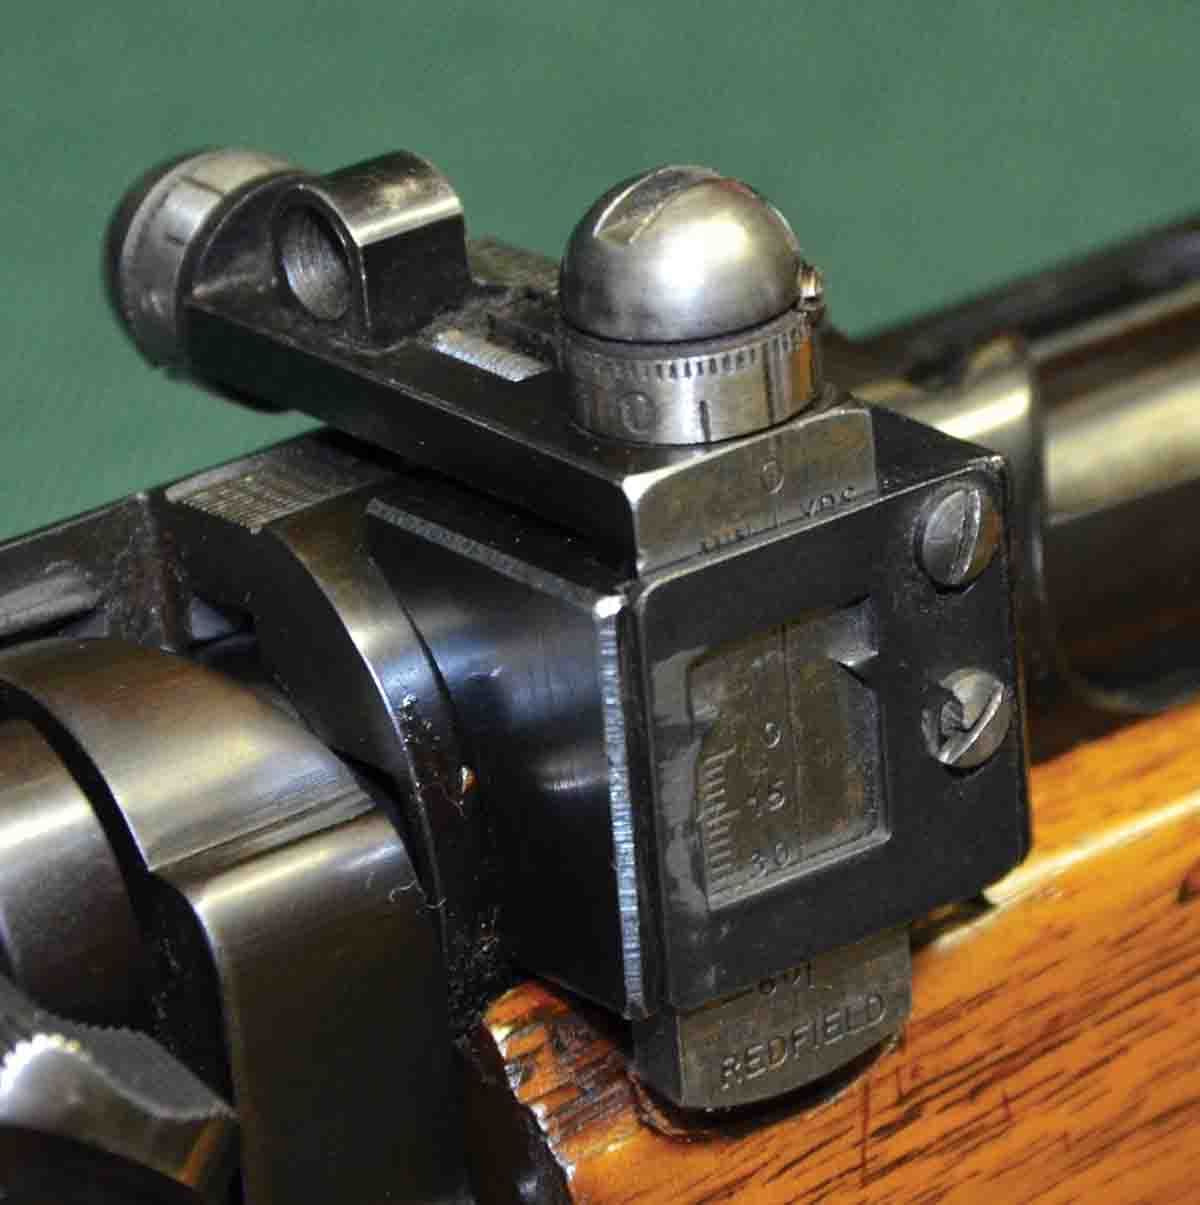 Lyman 48R and Redfield 102R receiver sights were extra cost options offered by Remington. Layne’s rifle has the Redfield.